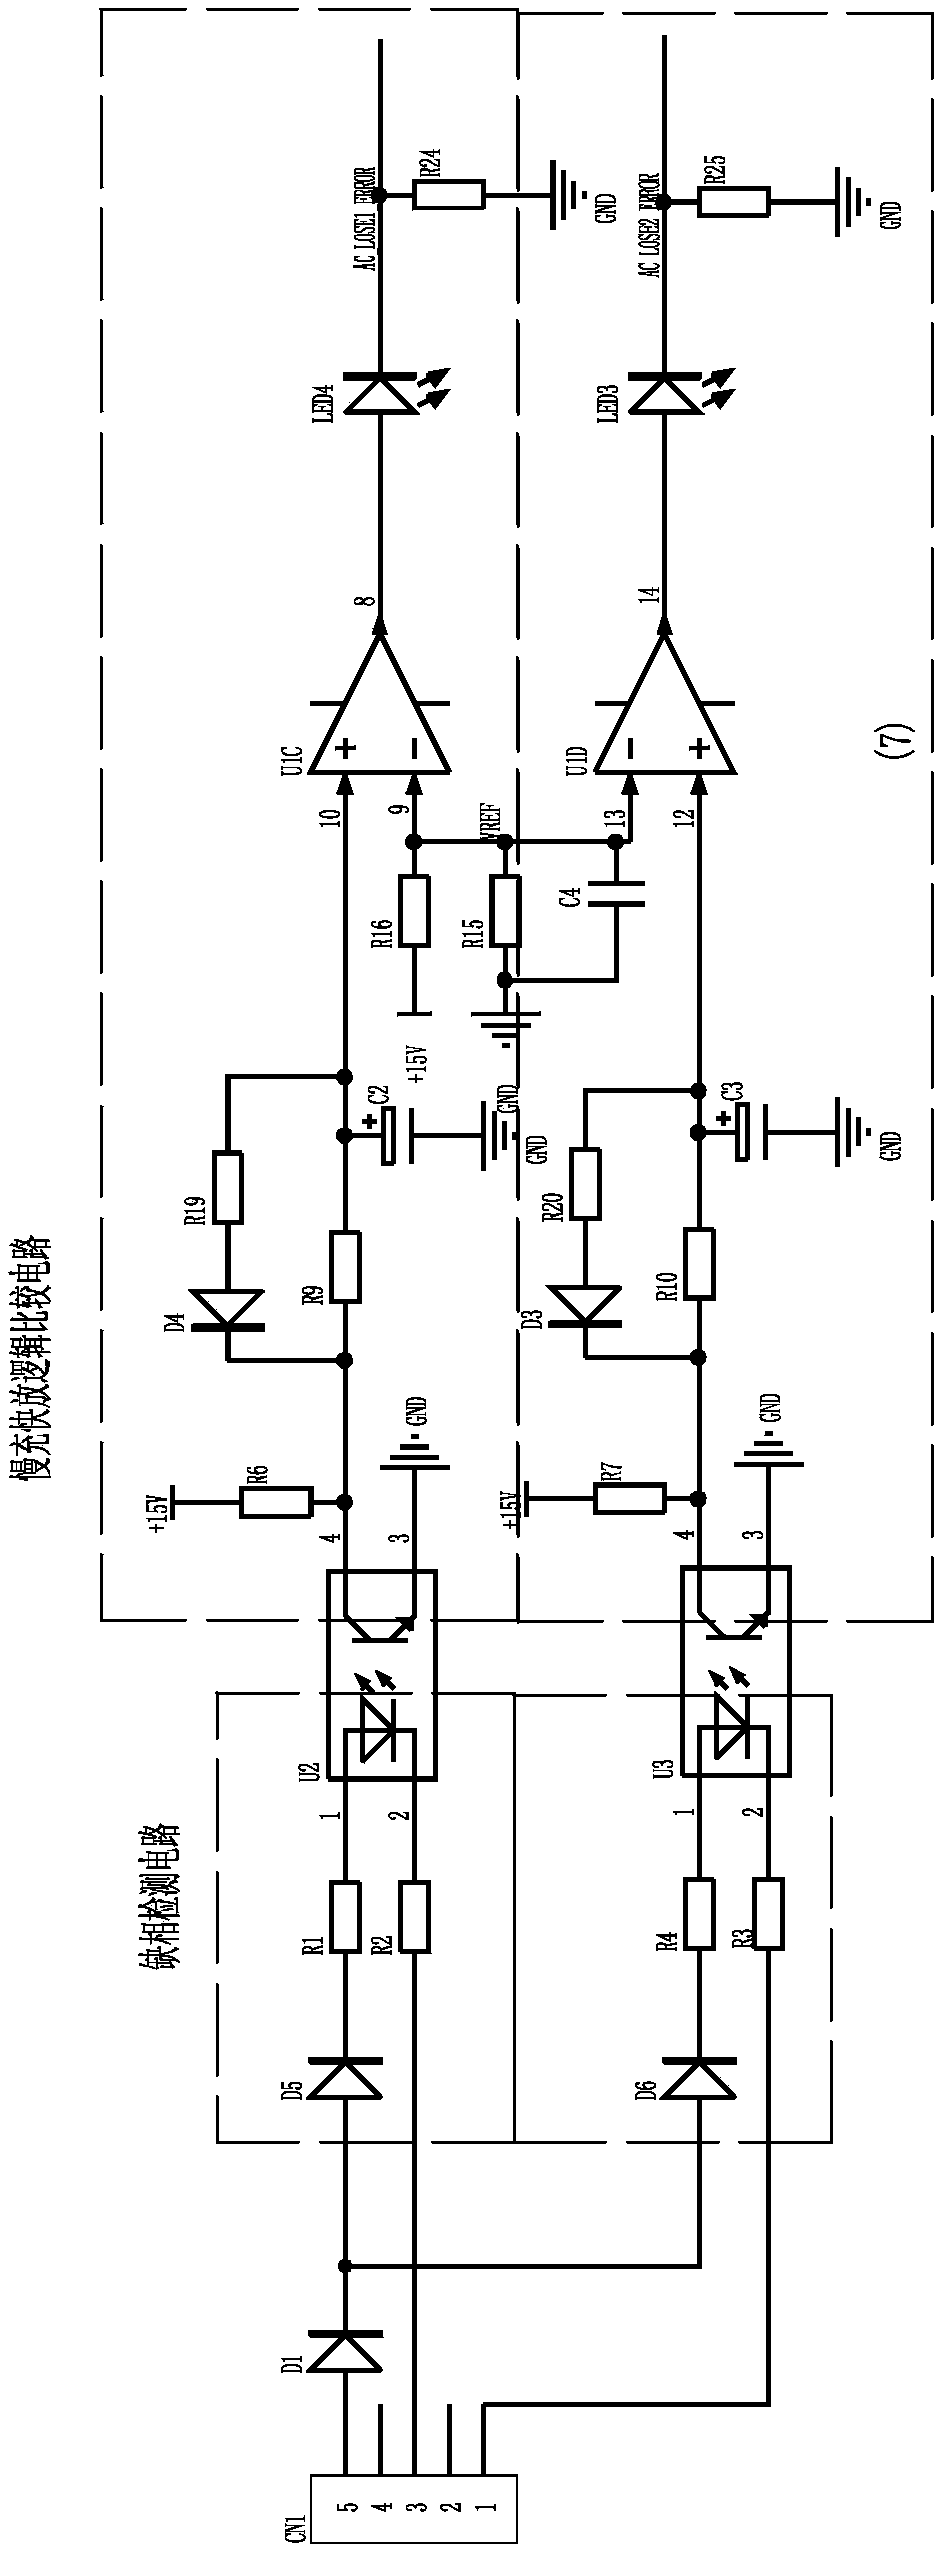 Three-phase electricity over-voltage, under-voltage and default phase alarm circuit based on peak voltage detection